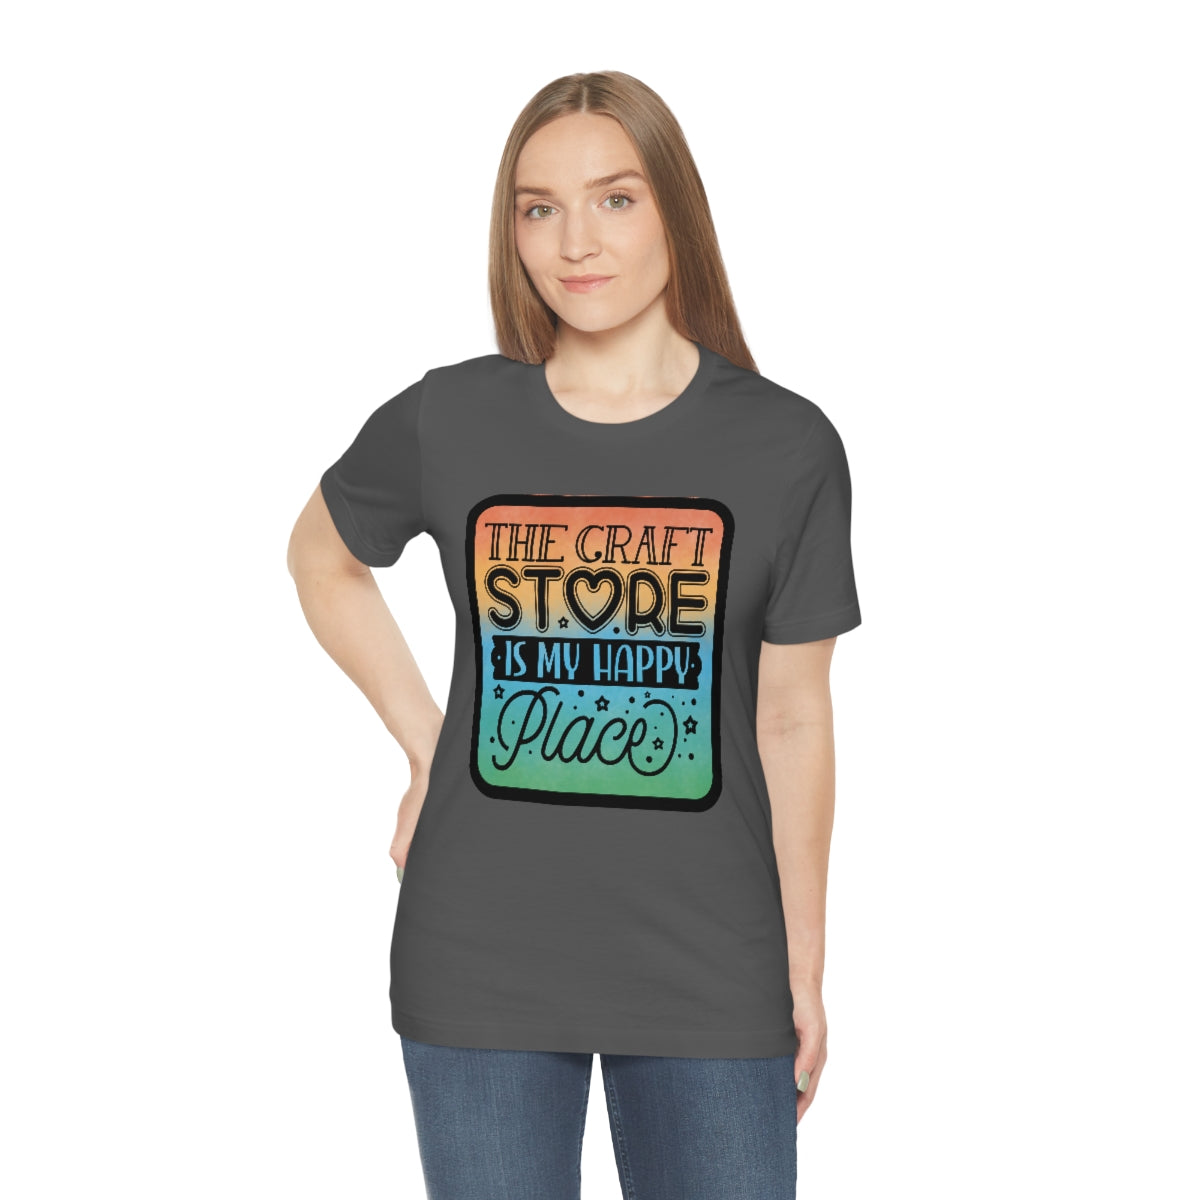 The Craft Store is My Happy Place Ombre Unisex Jersey Short Sleeve Tee S-3xl